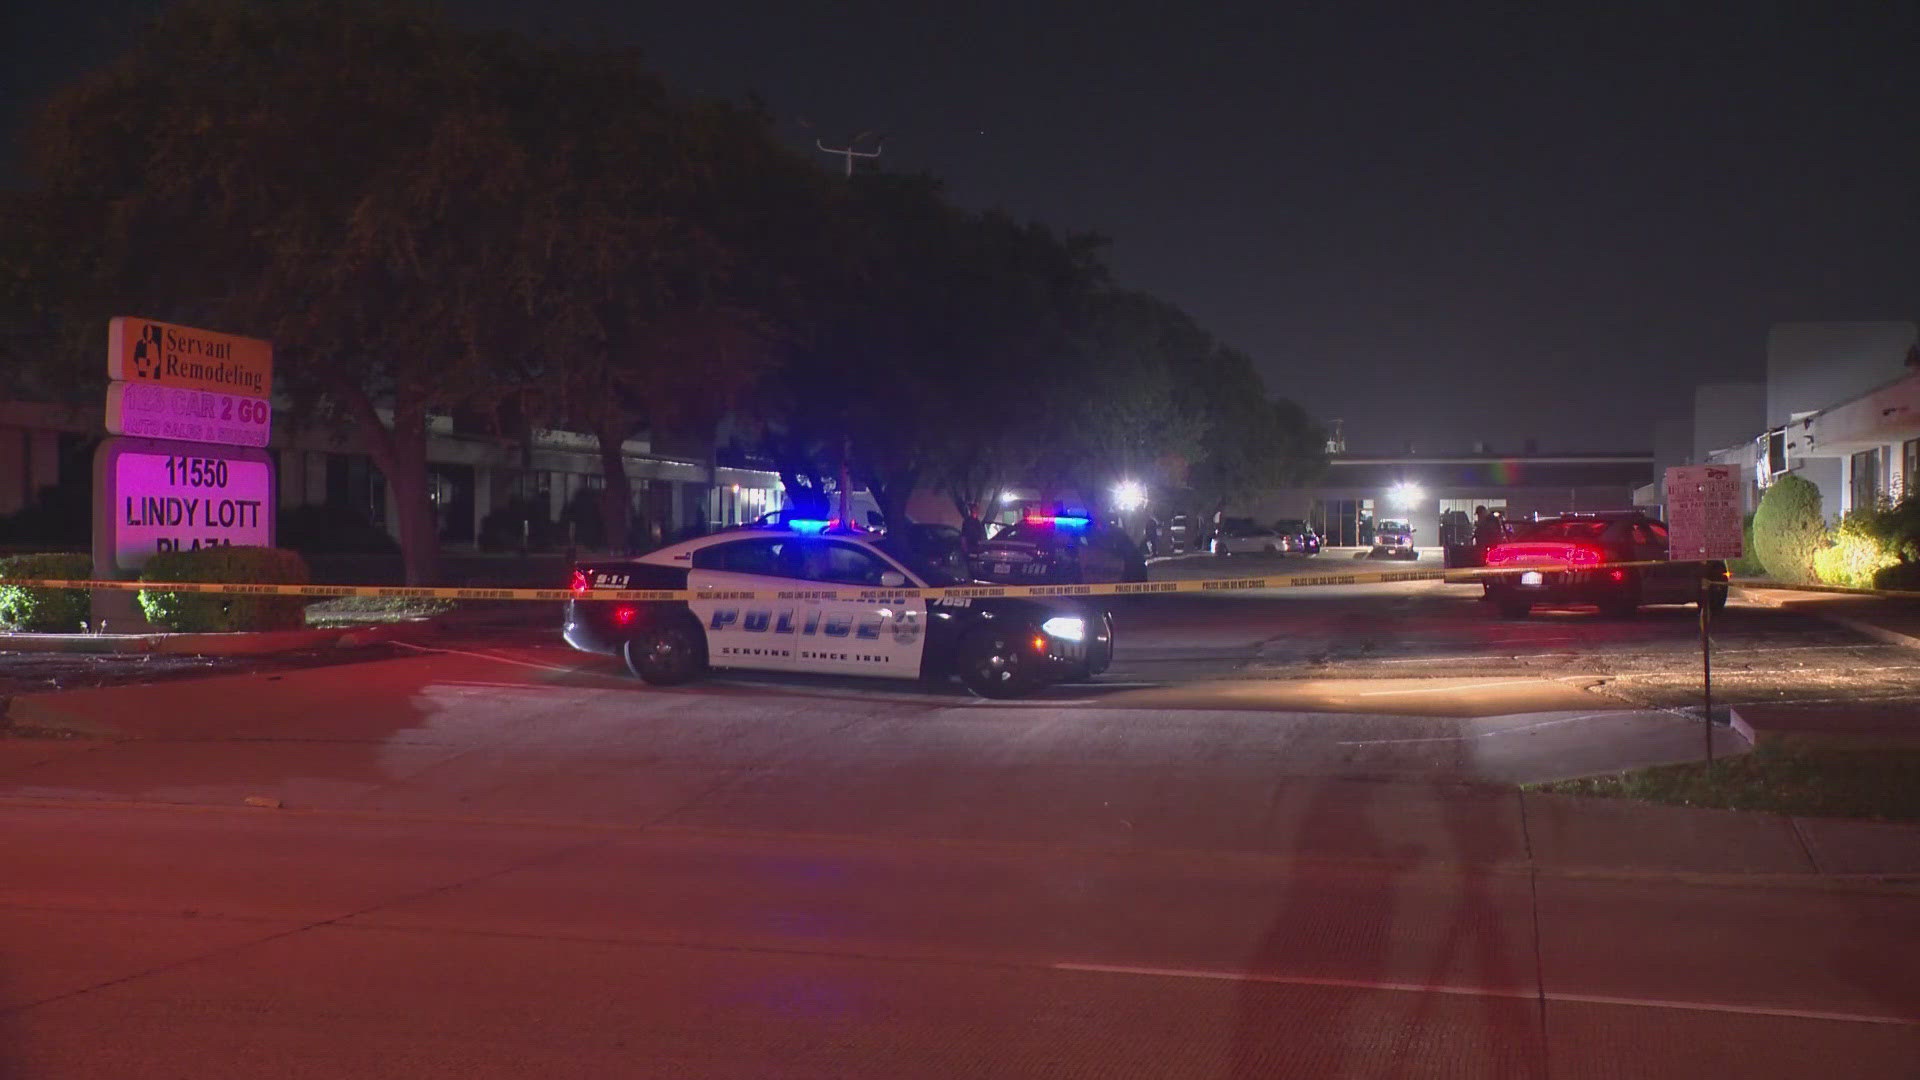 At least one person was killed in a Dallas shooting overnight.